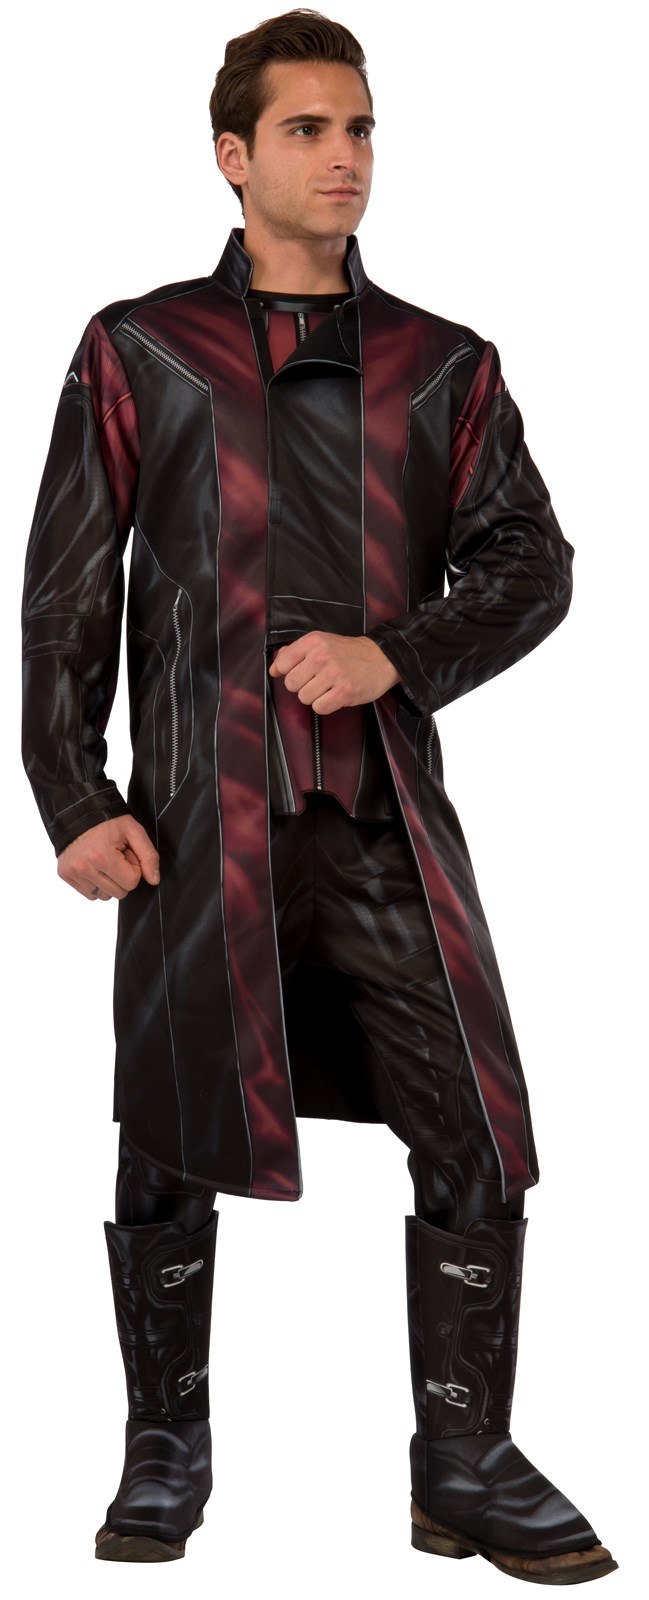 Avengers 2 - Age of Ultron: Deluxe Hawkeye Costume For Adults